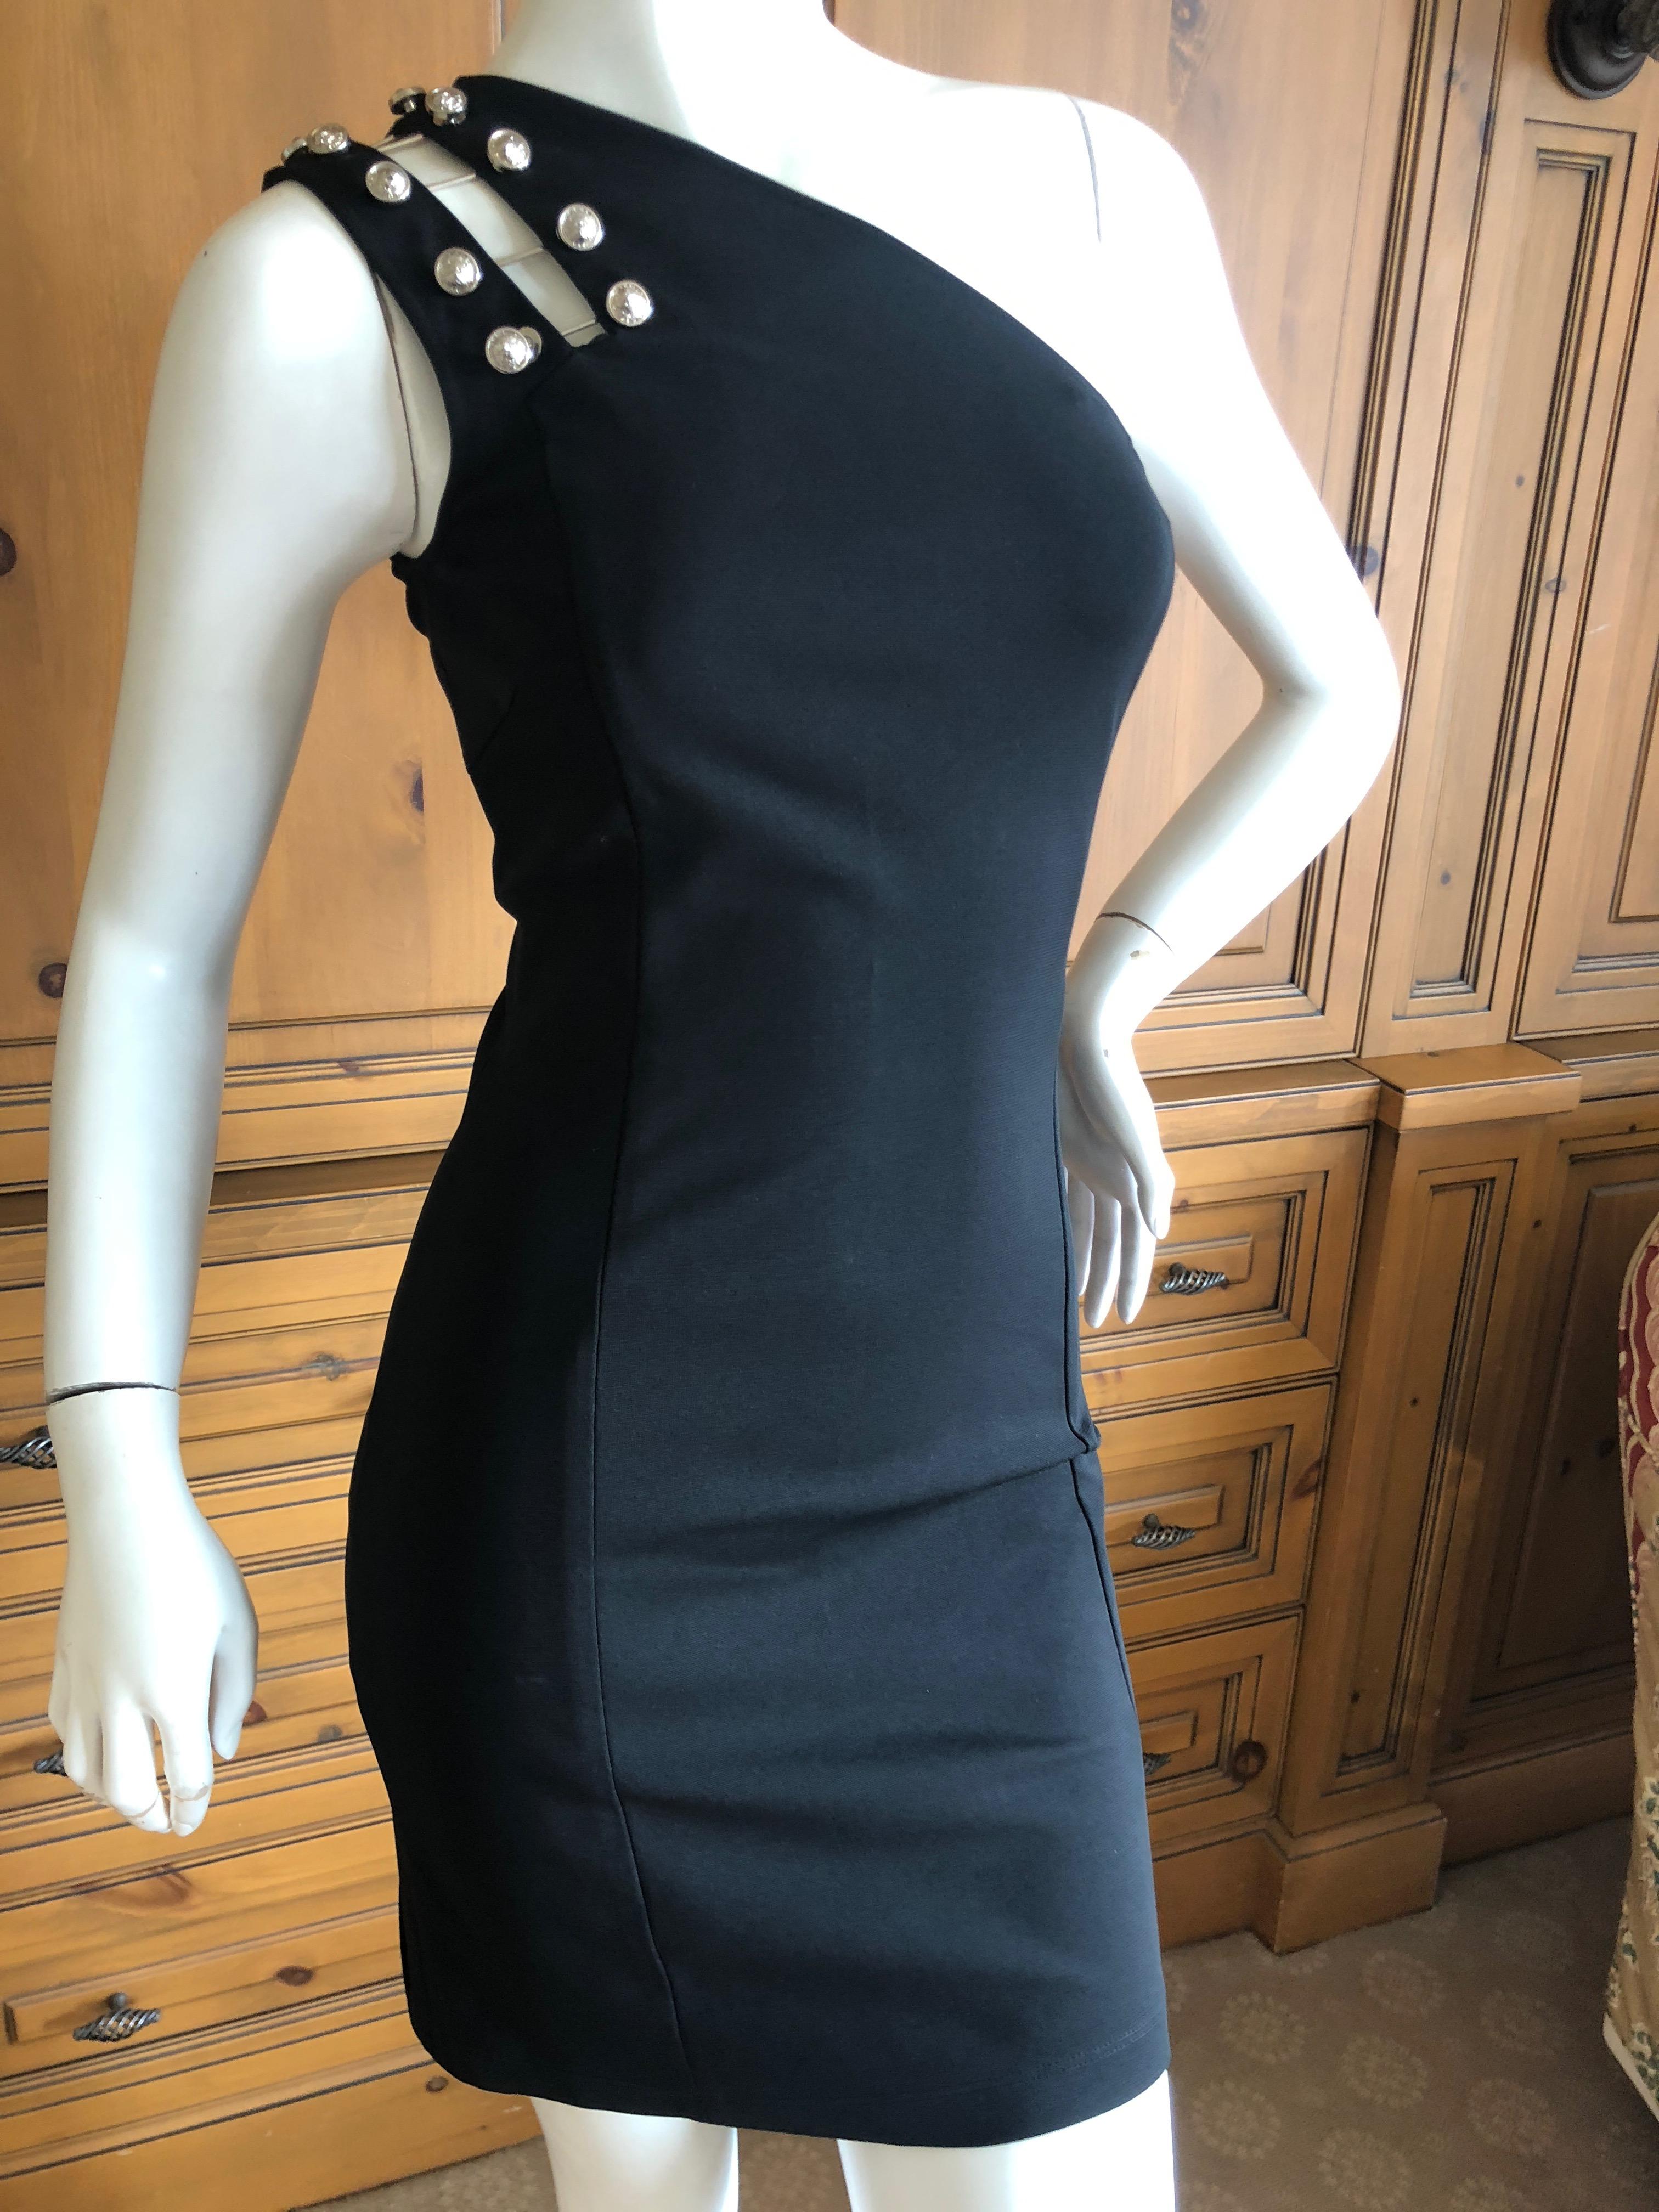 Versus by Versace Black Stretch Cocktail Dress with Shoulder Embelishment 
Sz 38
Supersexy on, this is a wonderful Versace

Bust 35